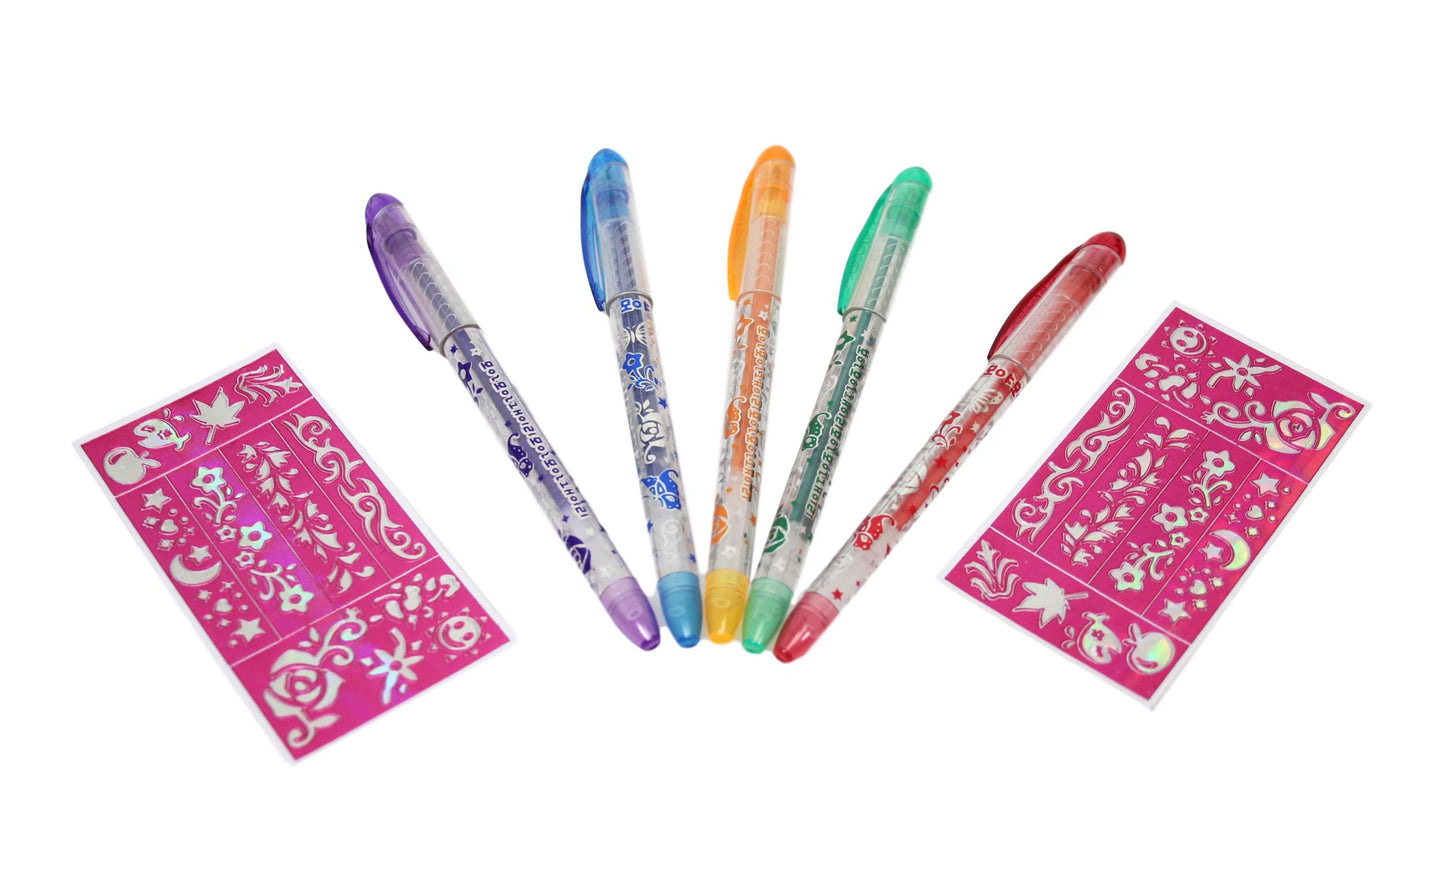 Tattoo Gel Pens Childrens Fun Art and Crafts Pens 2 Stencil Tattoo and 5 Gel Pens 3598 (Large Letter Rate)